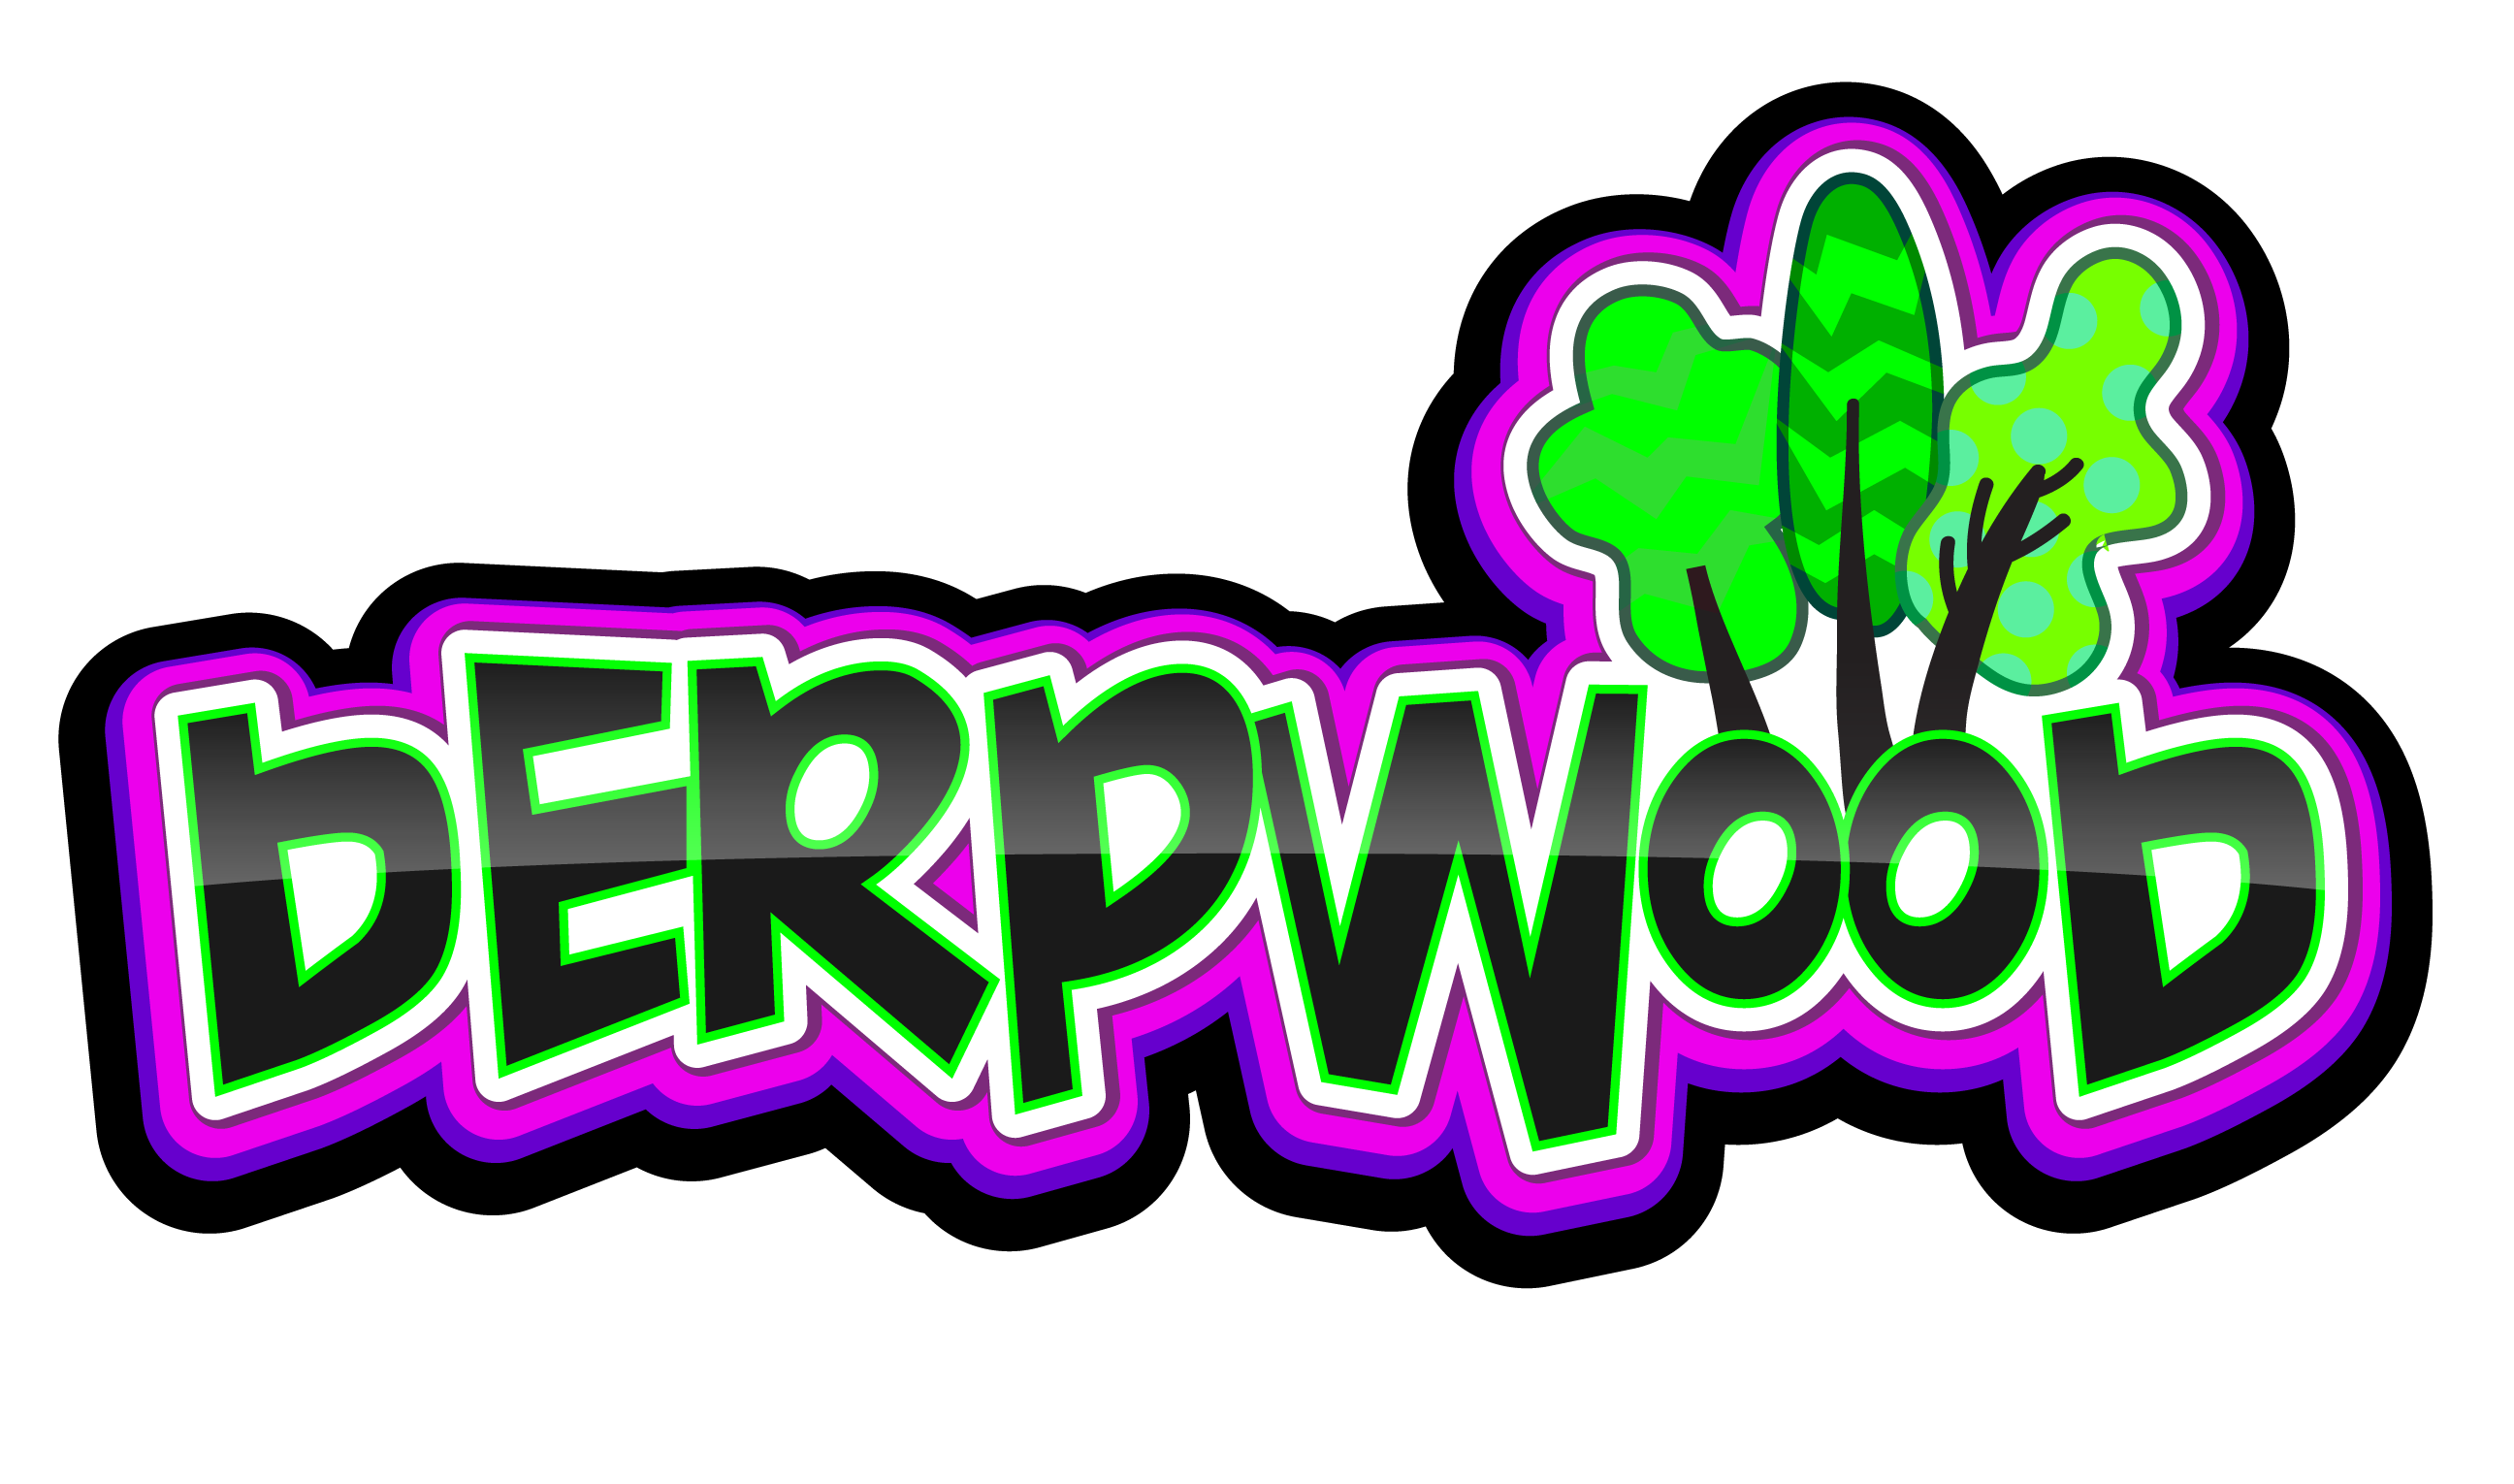 The Derpwood